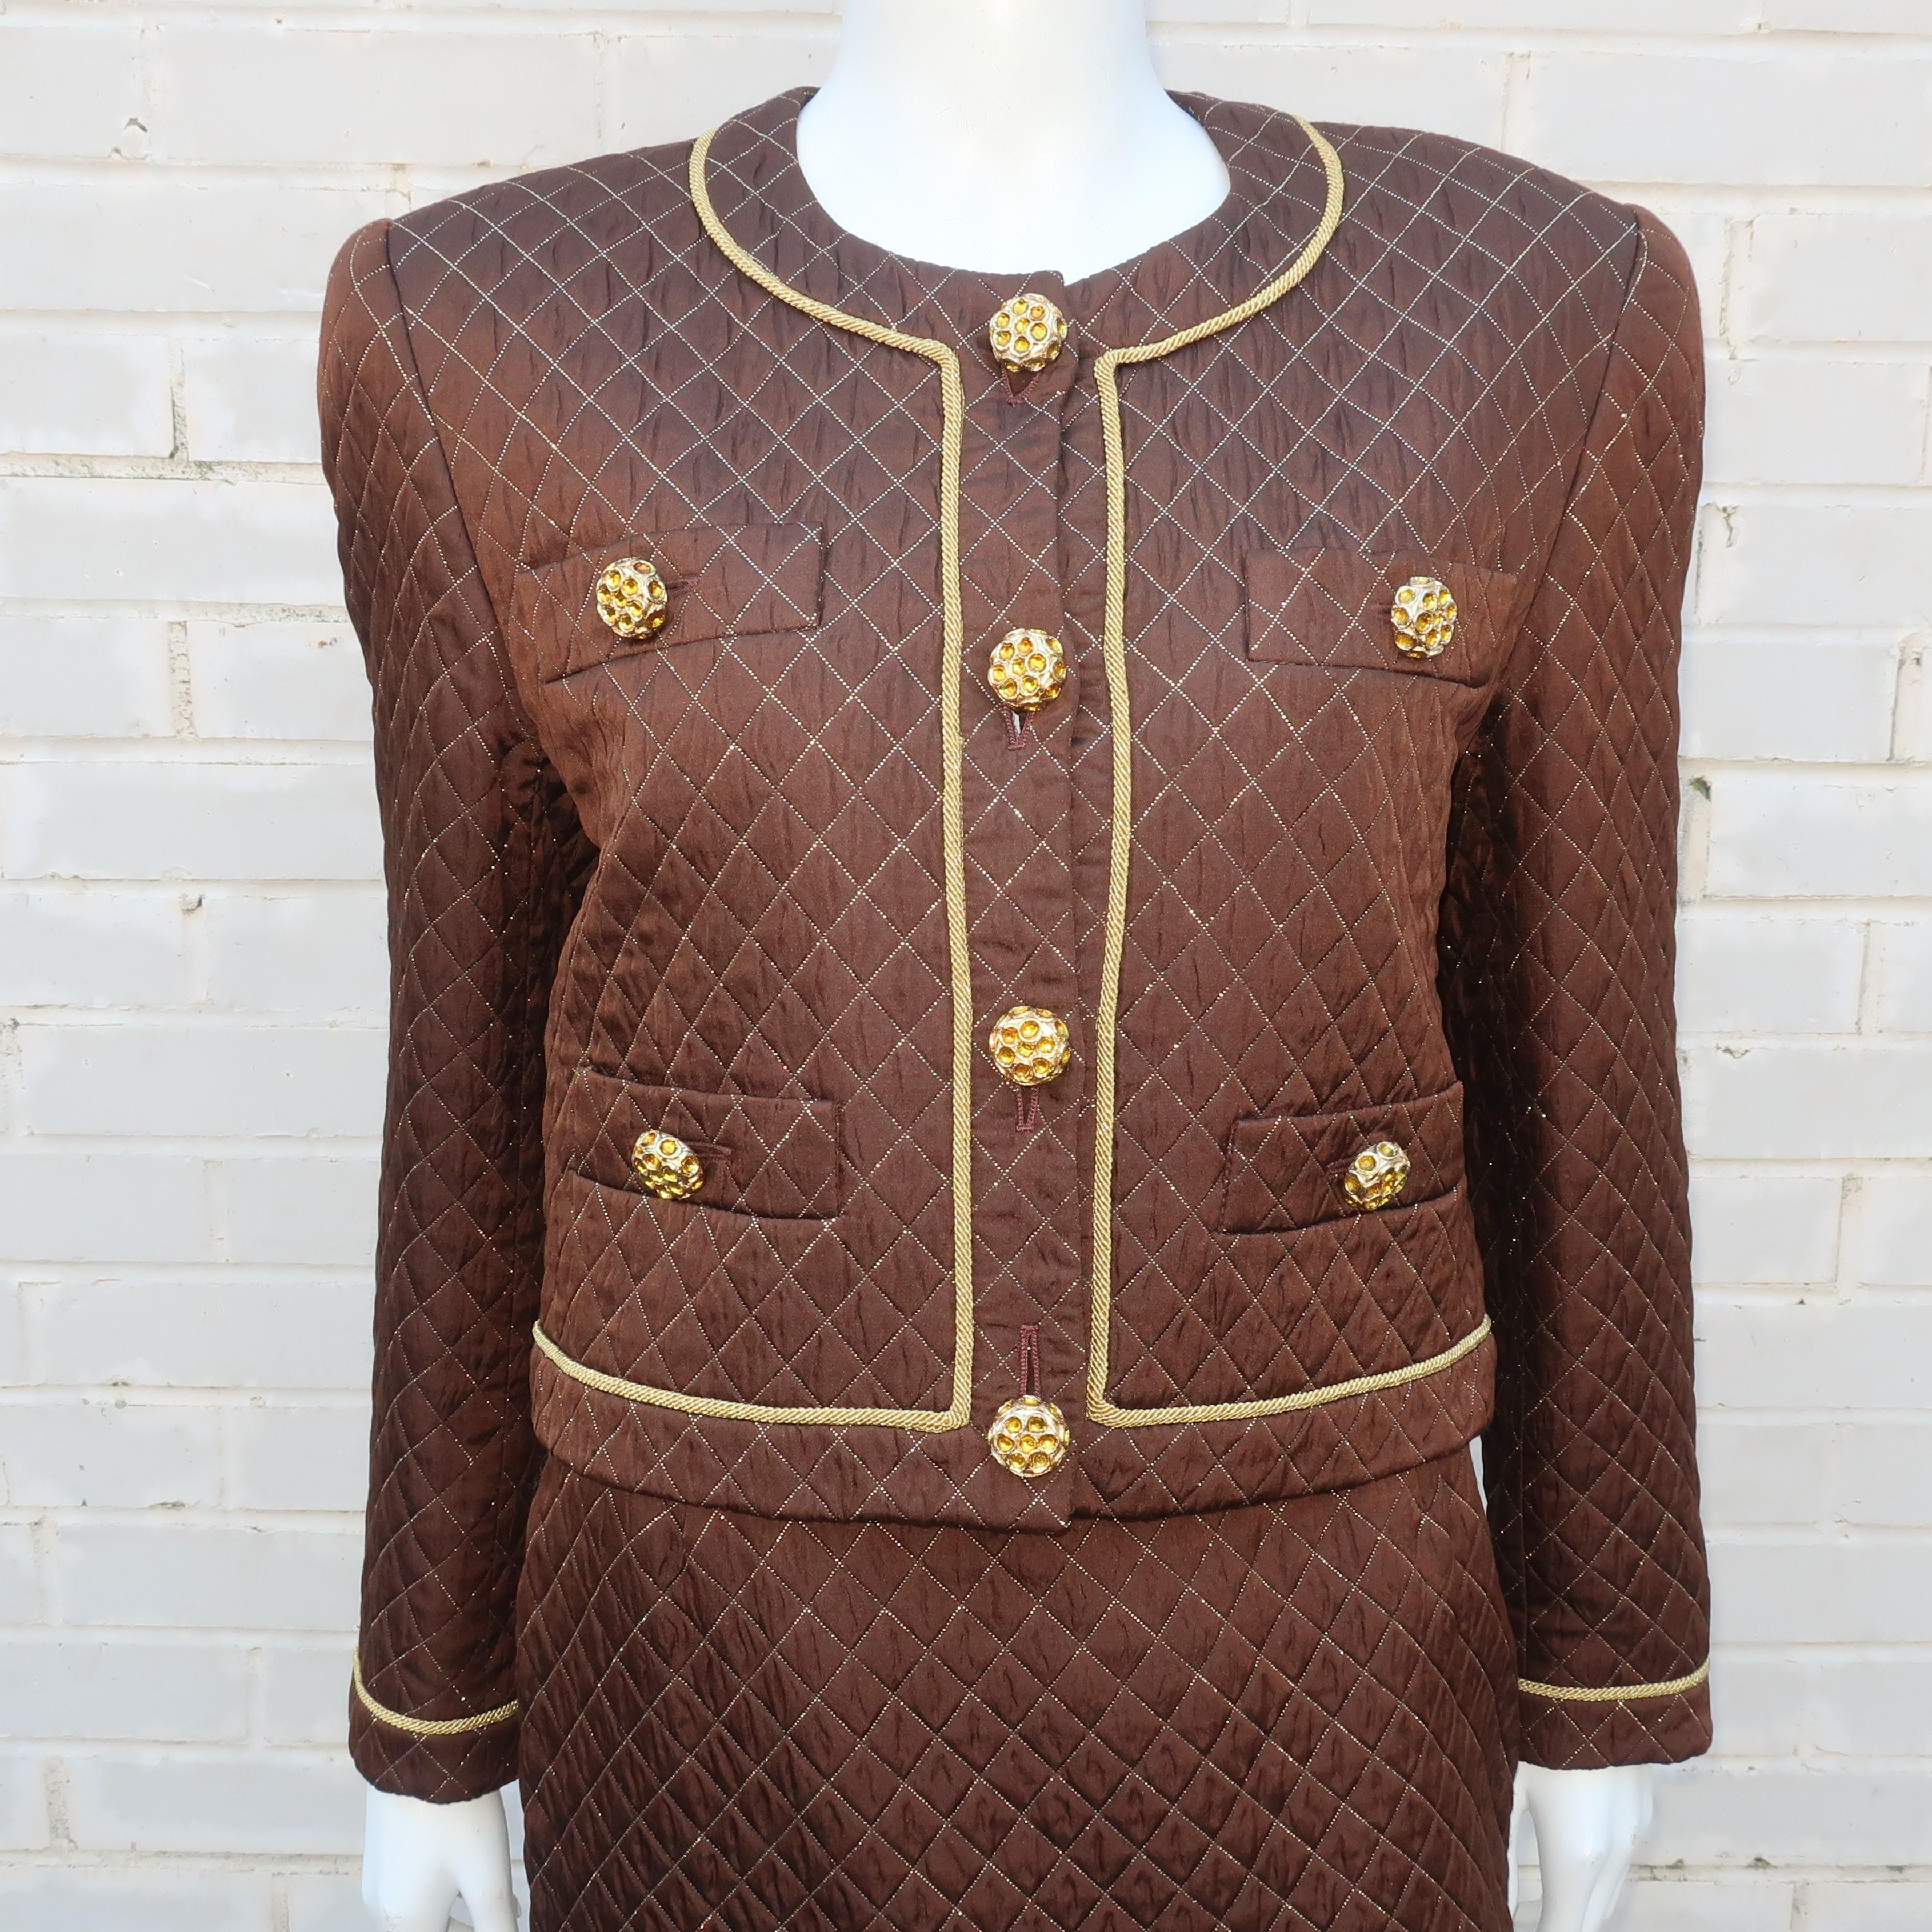 Some of the most beautiful power suits of the 1980's sprung from the artistic mind of Margaretha Ley and her Escada label.  This two piece suit features a cropped jacket and coordinating skirt in a brown silk blend fabric glamorously quilted with